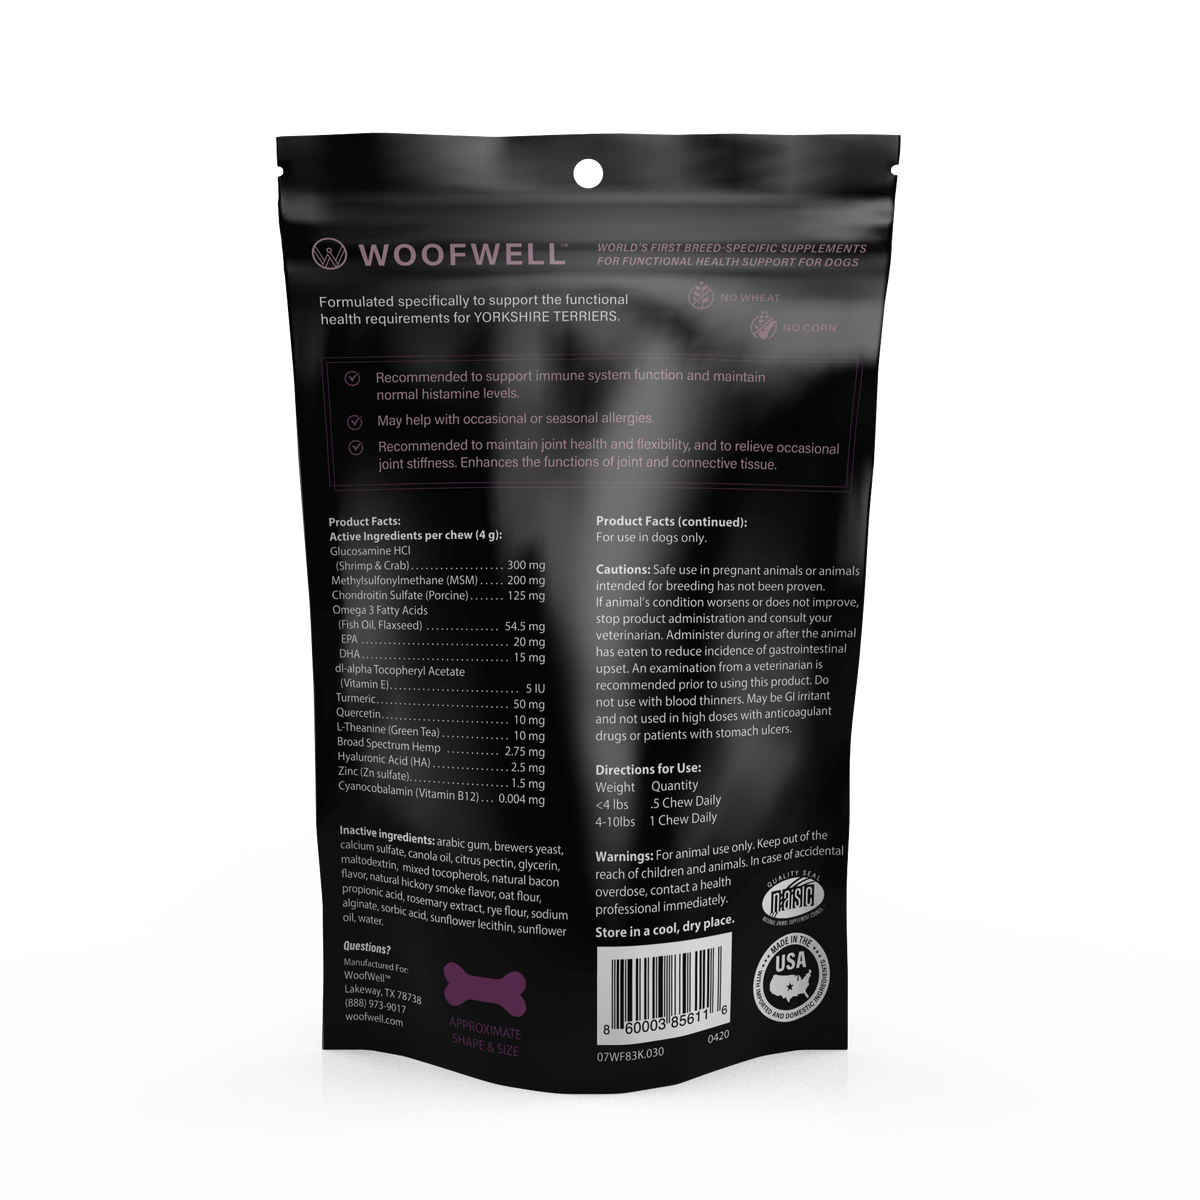 Product Facts for WoofWell Yorkshire Terrier Health Supplements- WoofWell Breed-Specific Health Supplements for dogs